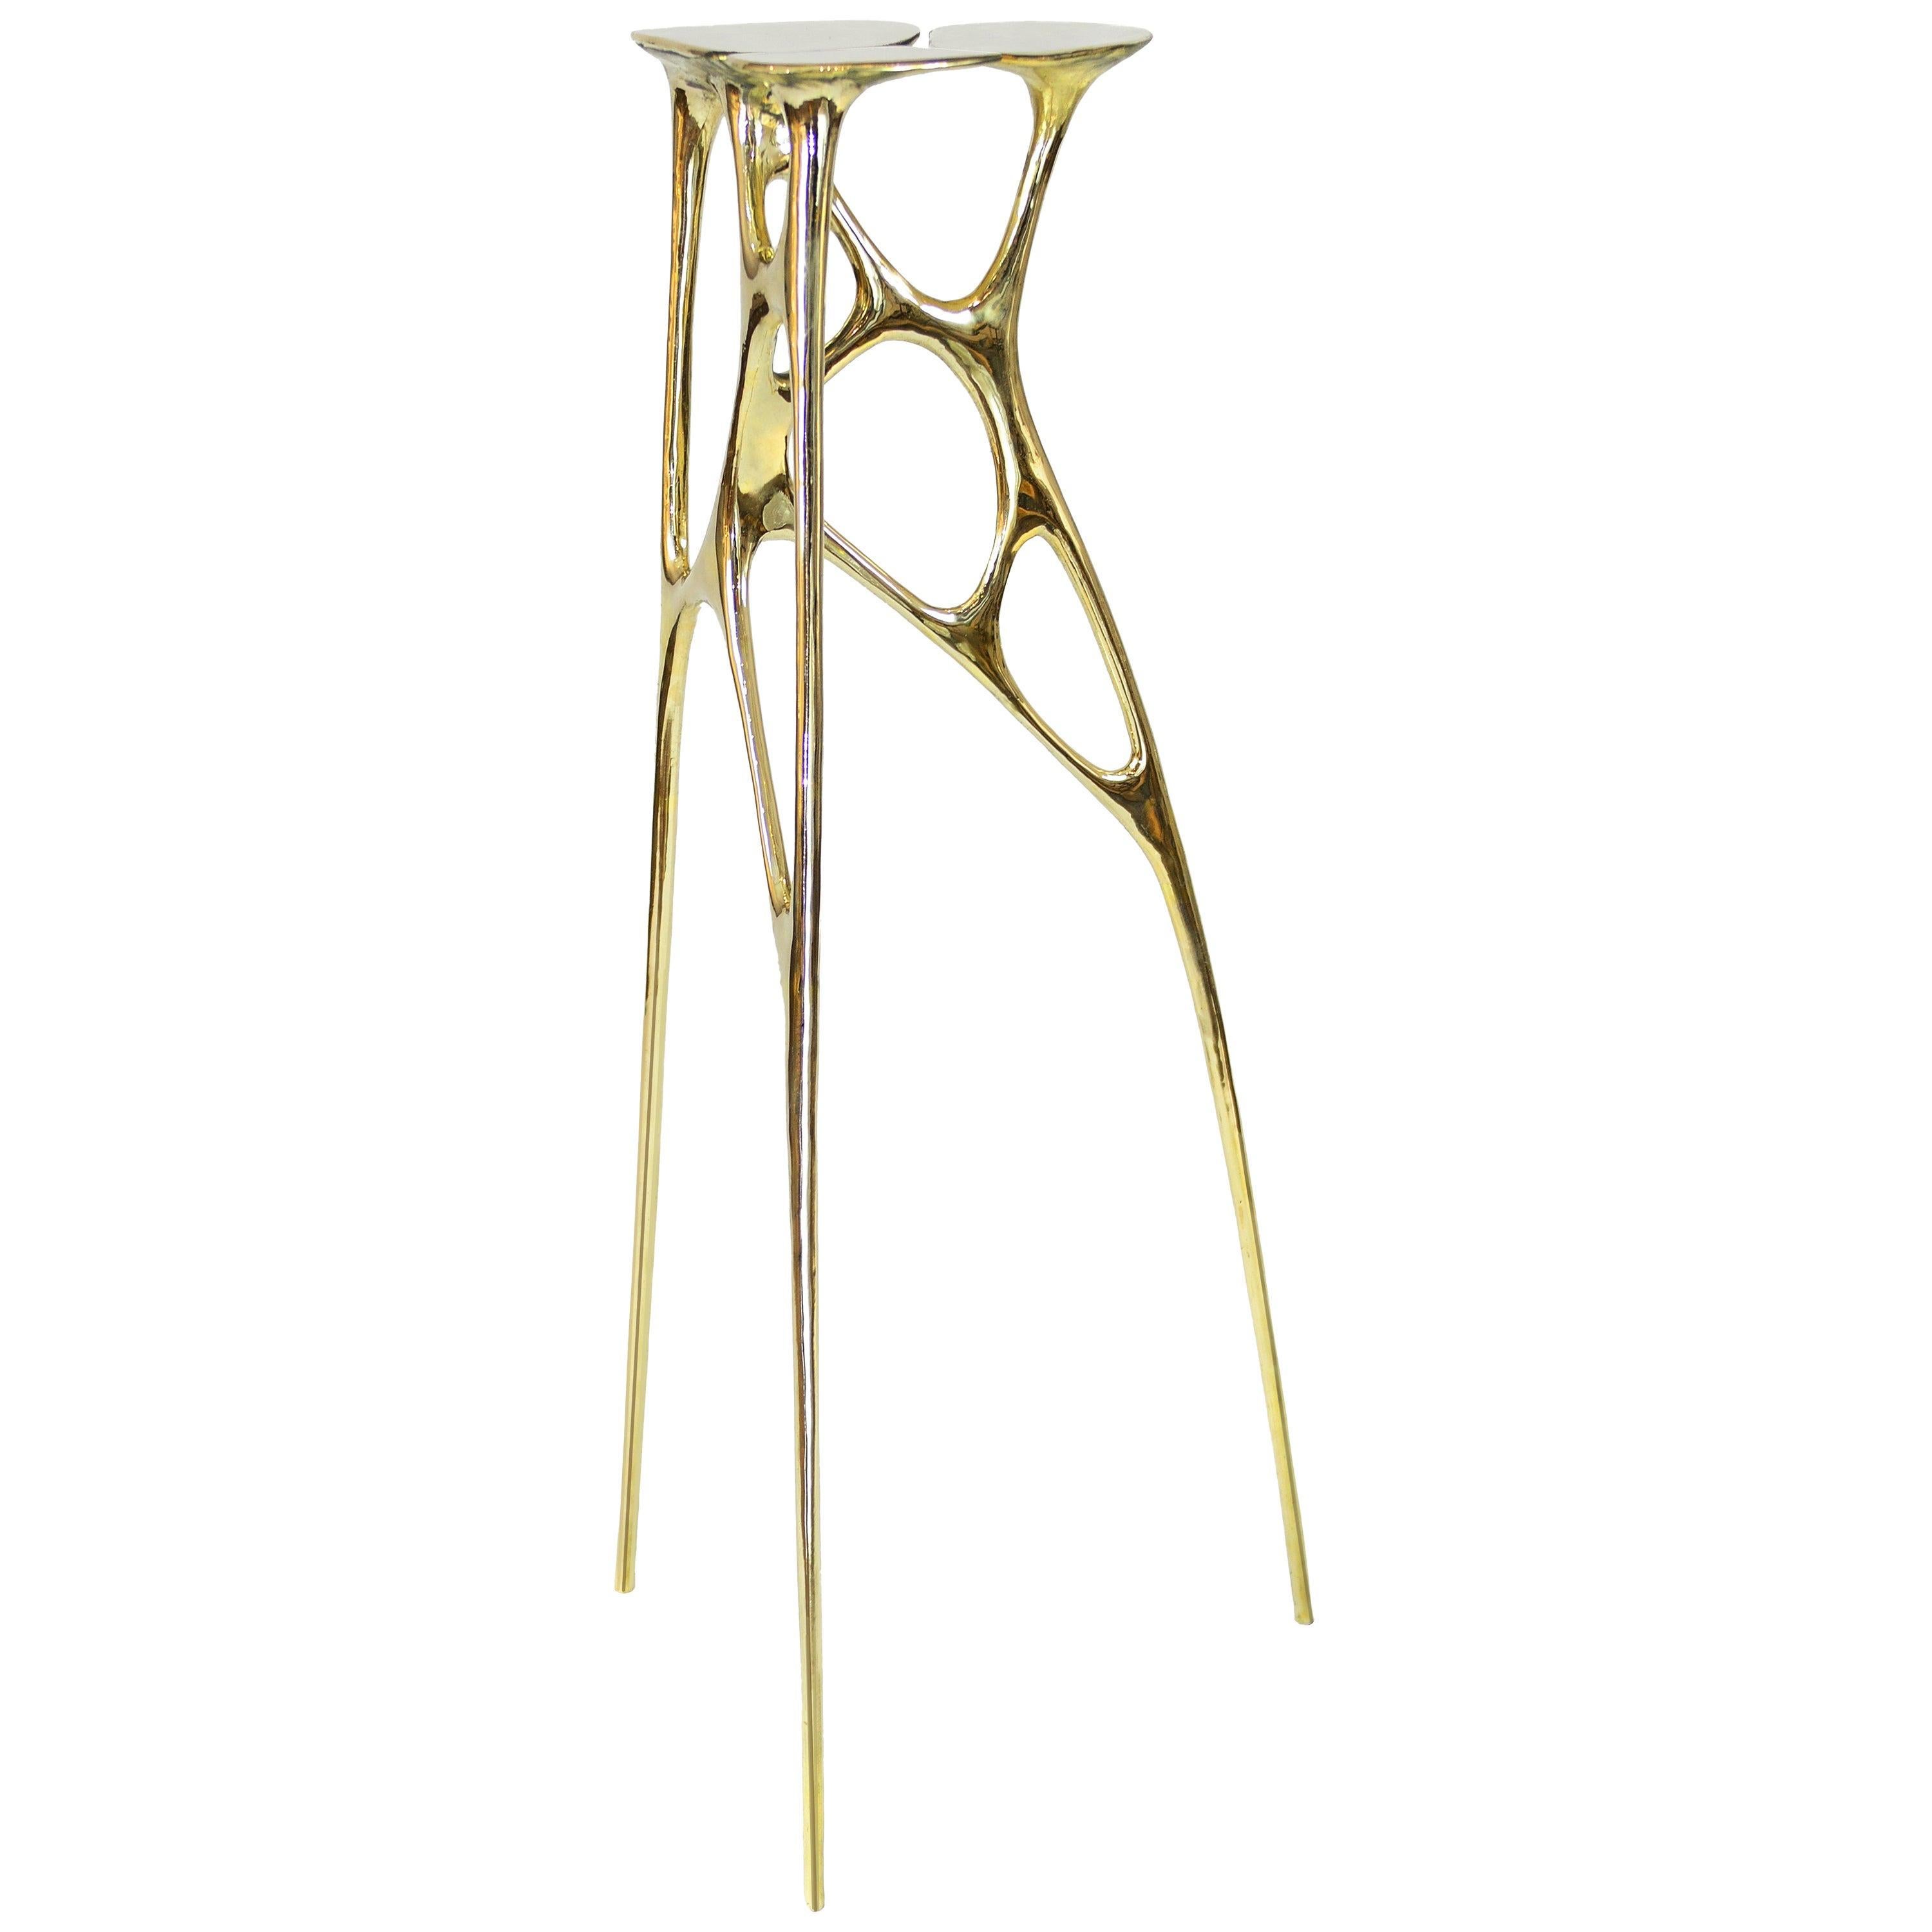 Polished Brass Gold Lotus Pedestal/Planter Stand/Accent Table by Zhipeng Tan